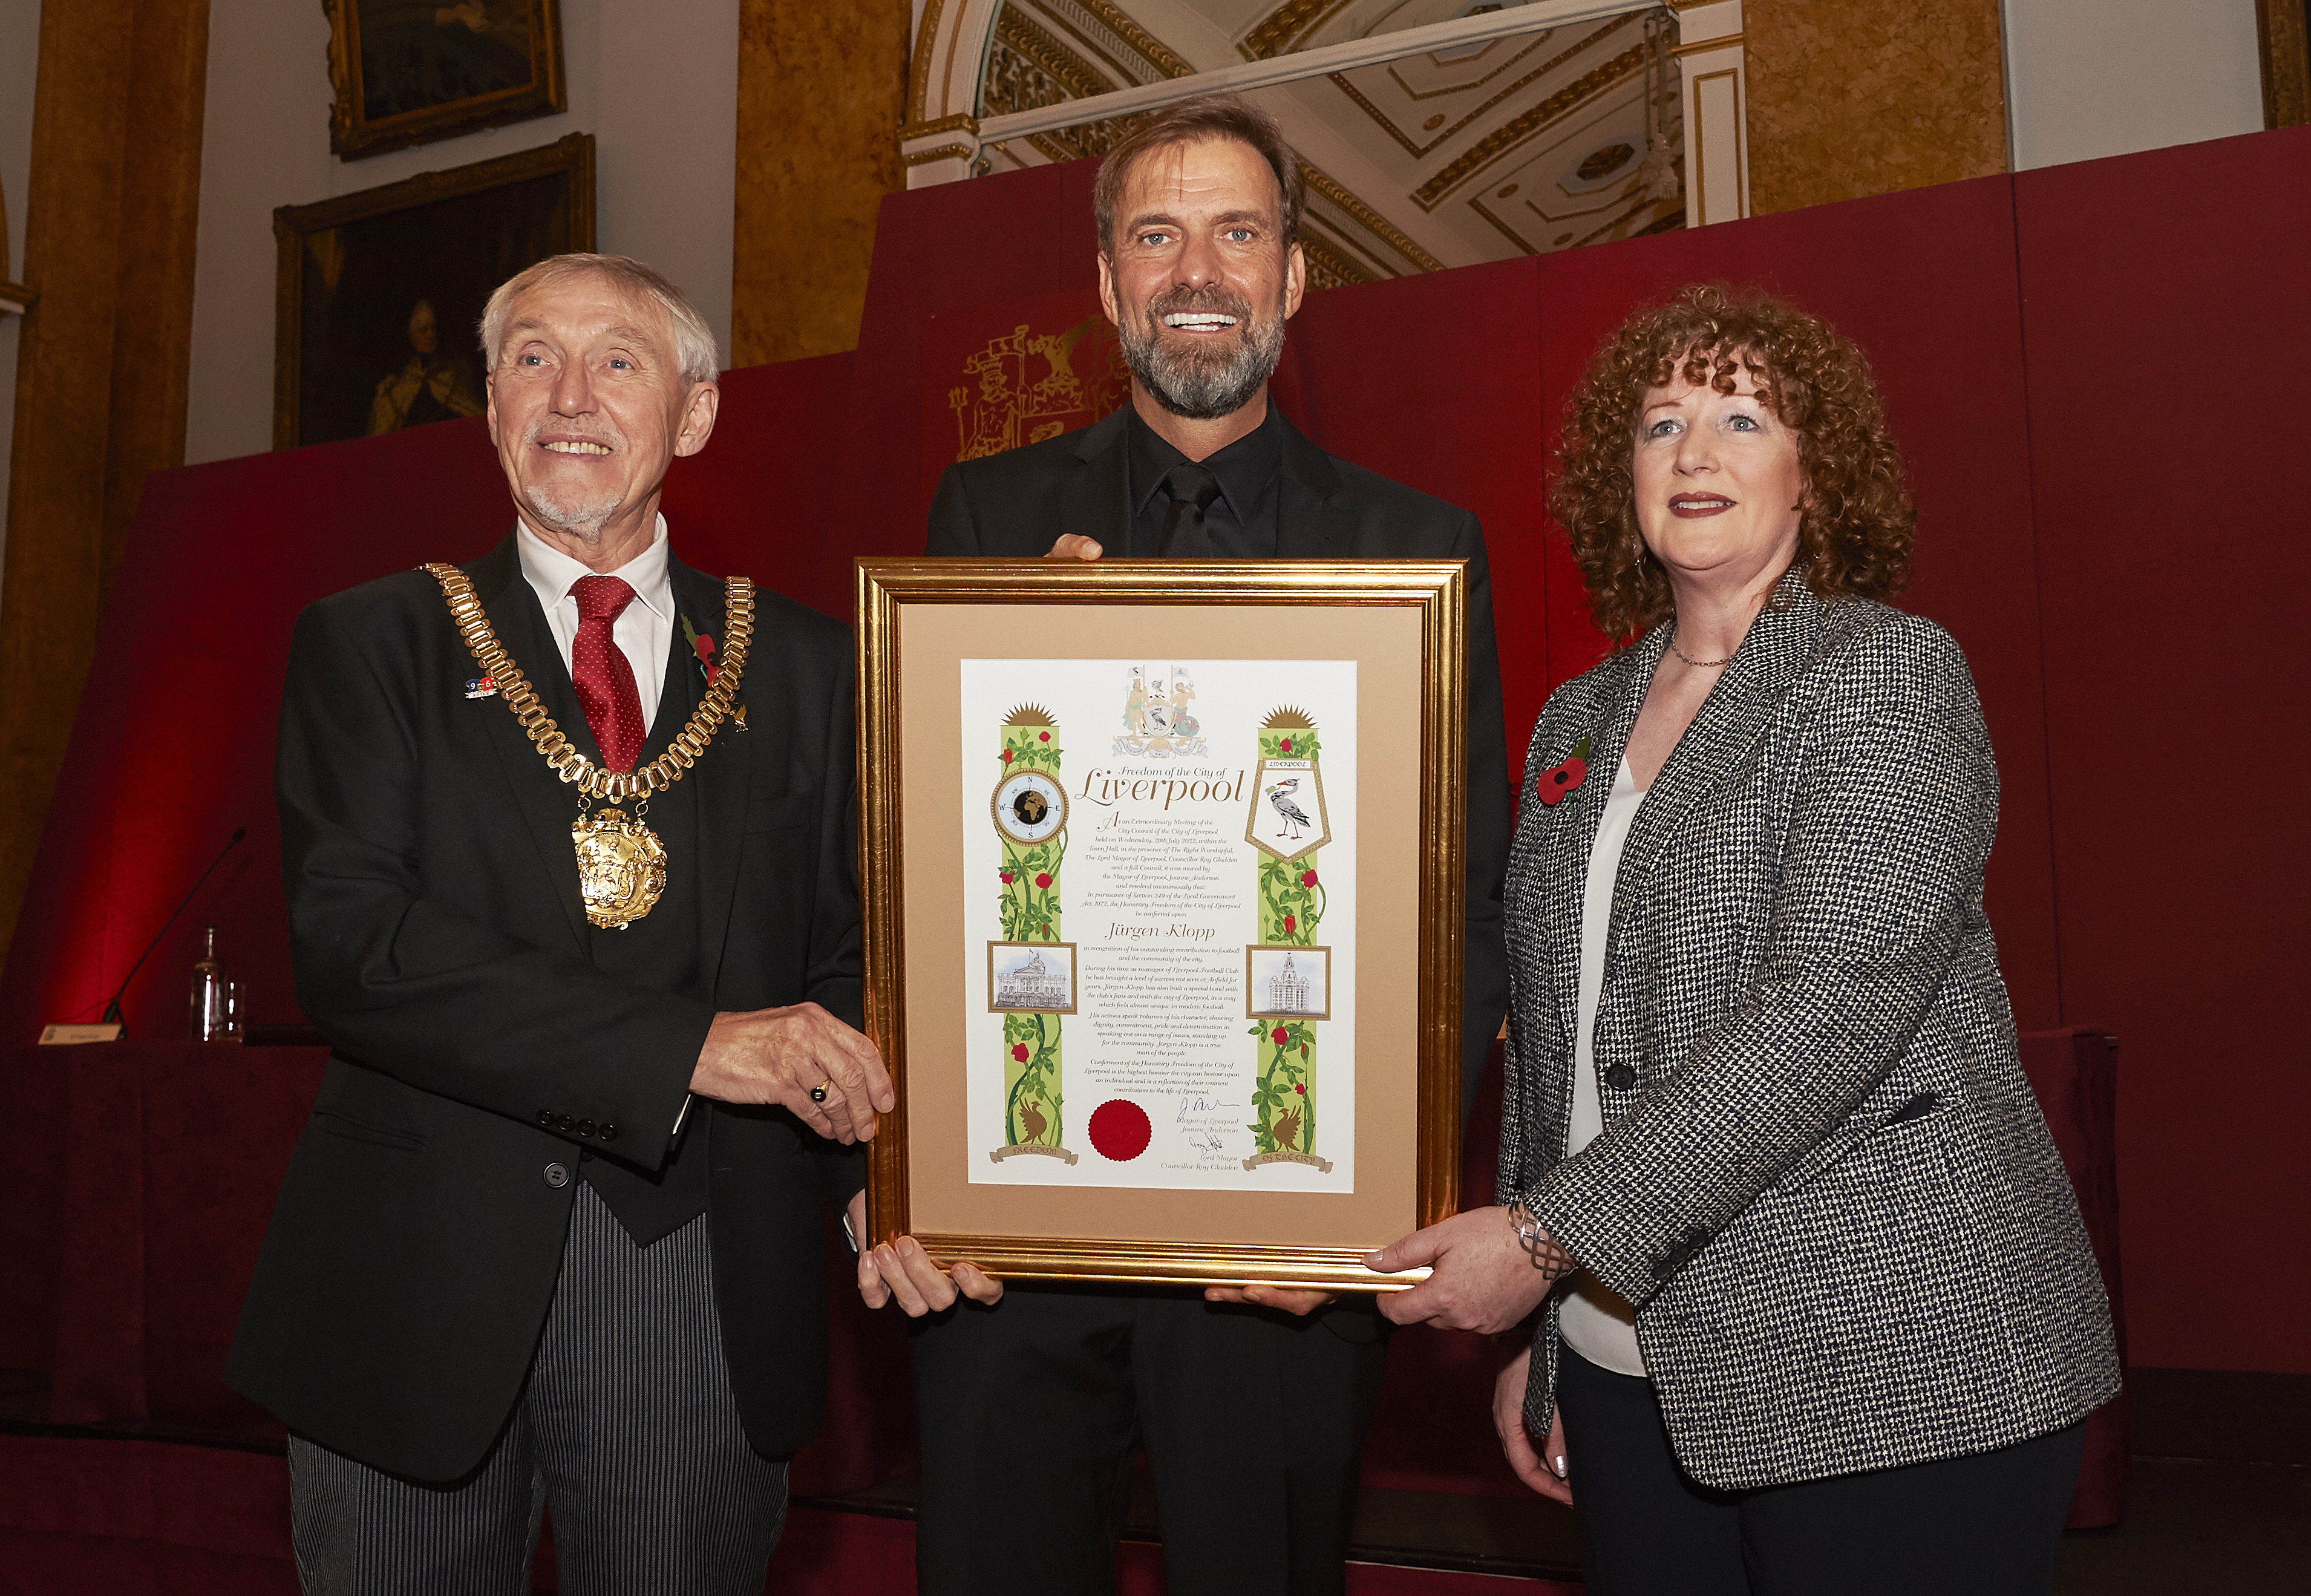 Jurgen Klopp Given The Freedom Of The City Of Liverpool